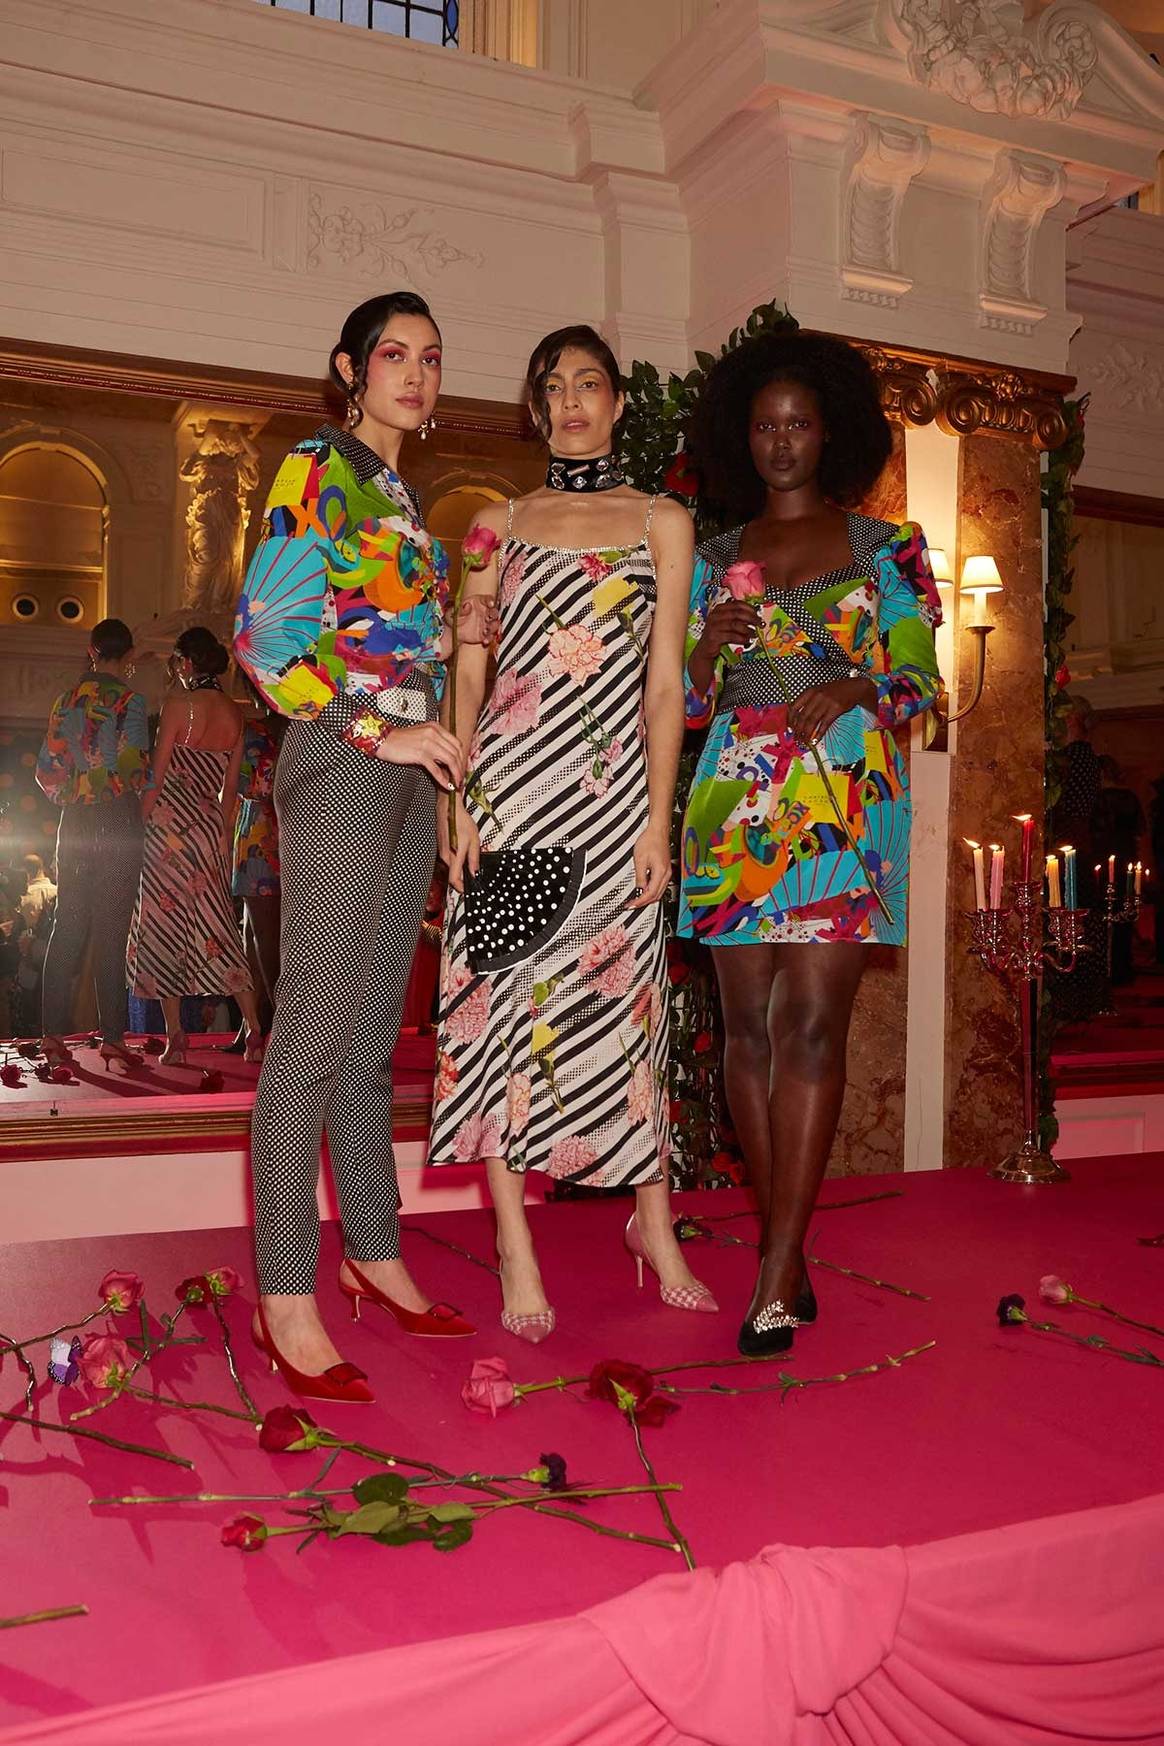 LFW AW20: Rixo collaborates with Christian Lacroix